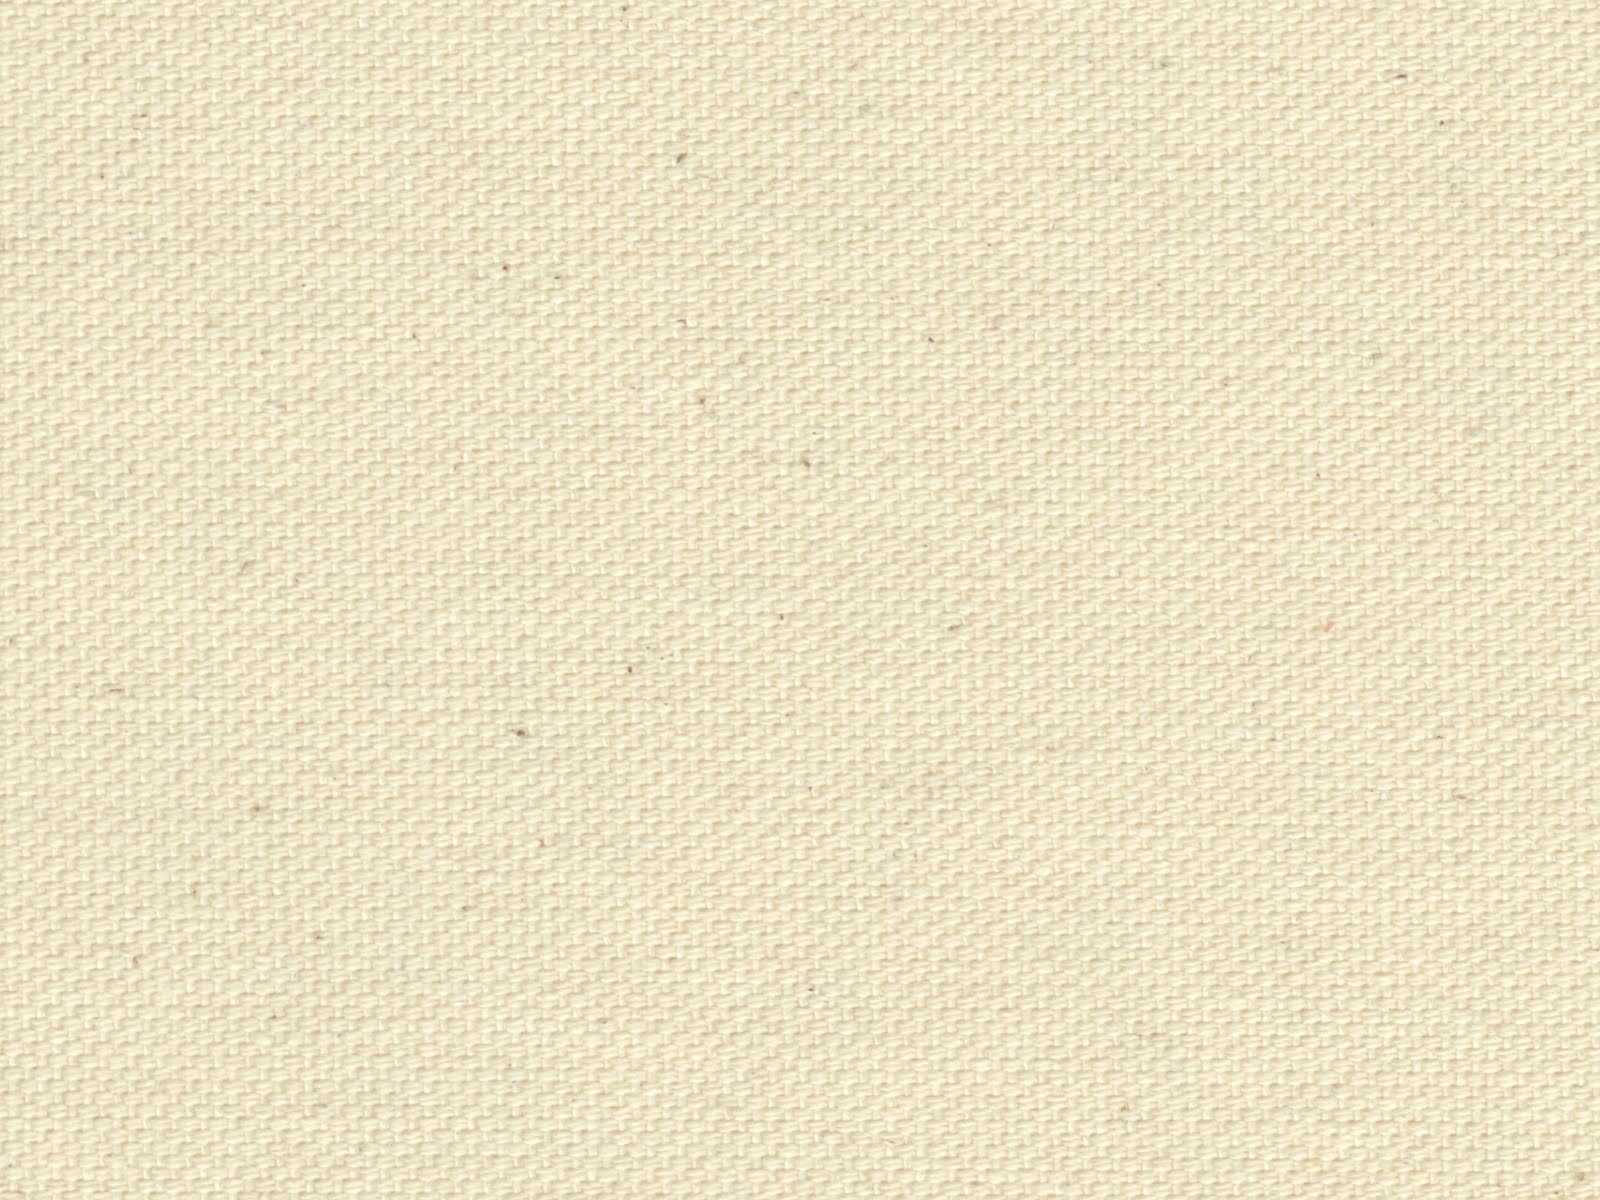 Plain Beige Background Suitably With A